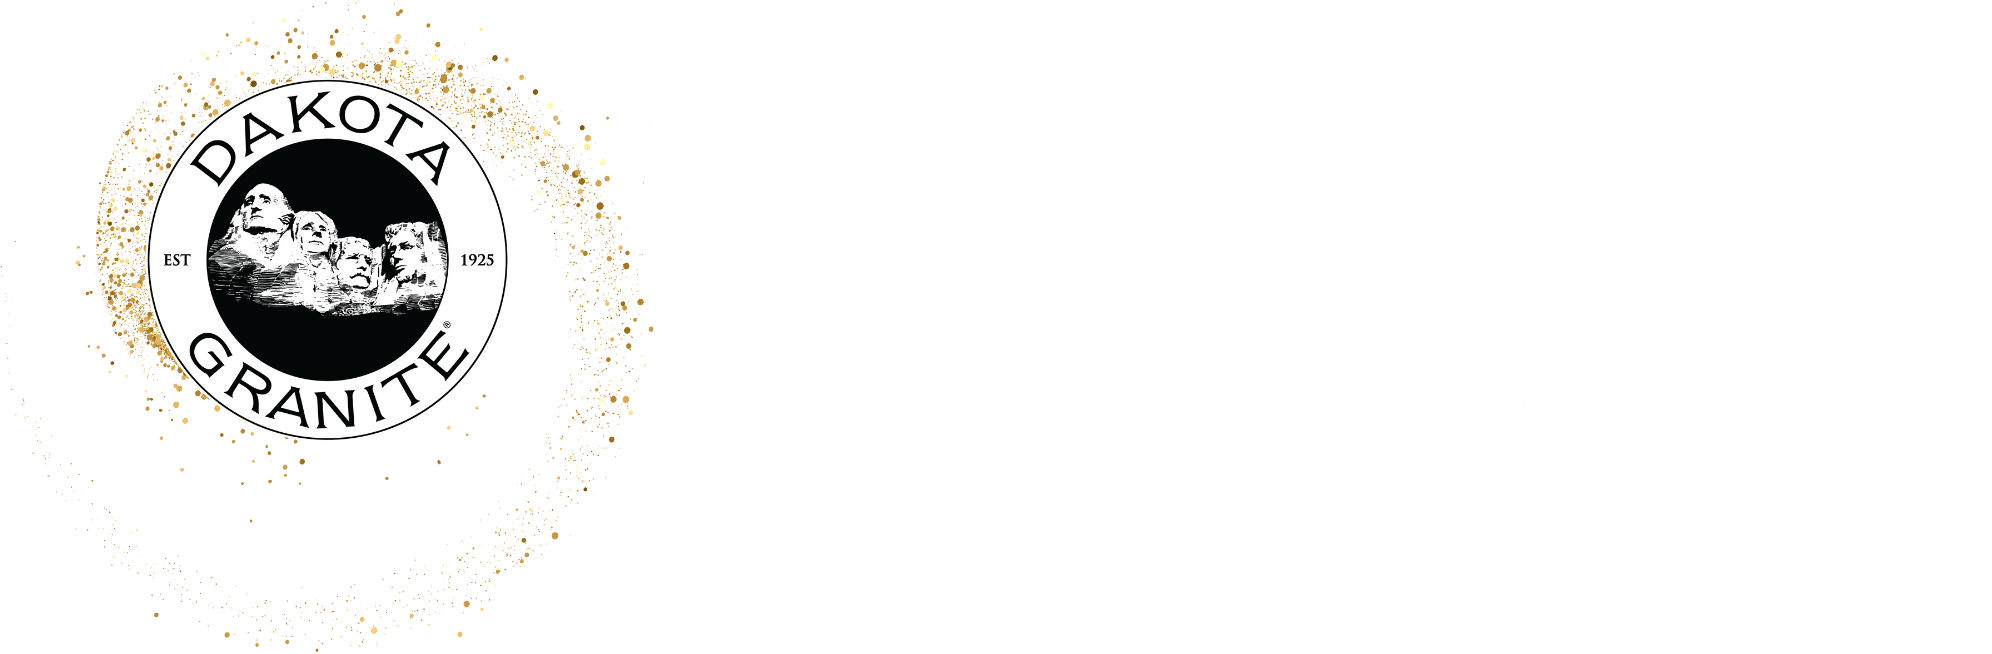 A green background with the word diva masuo written in white.